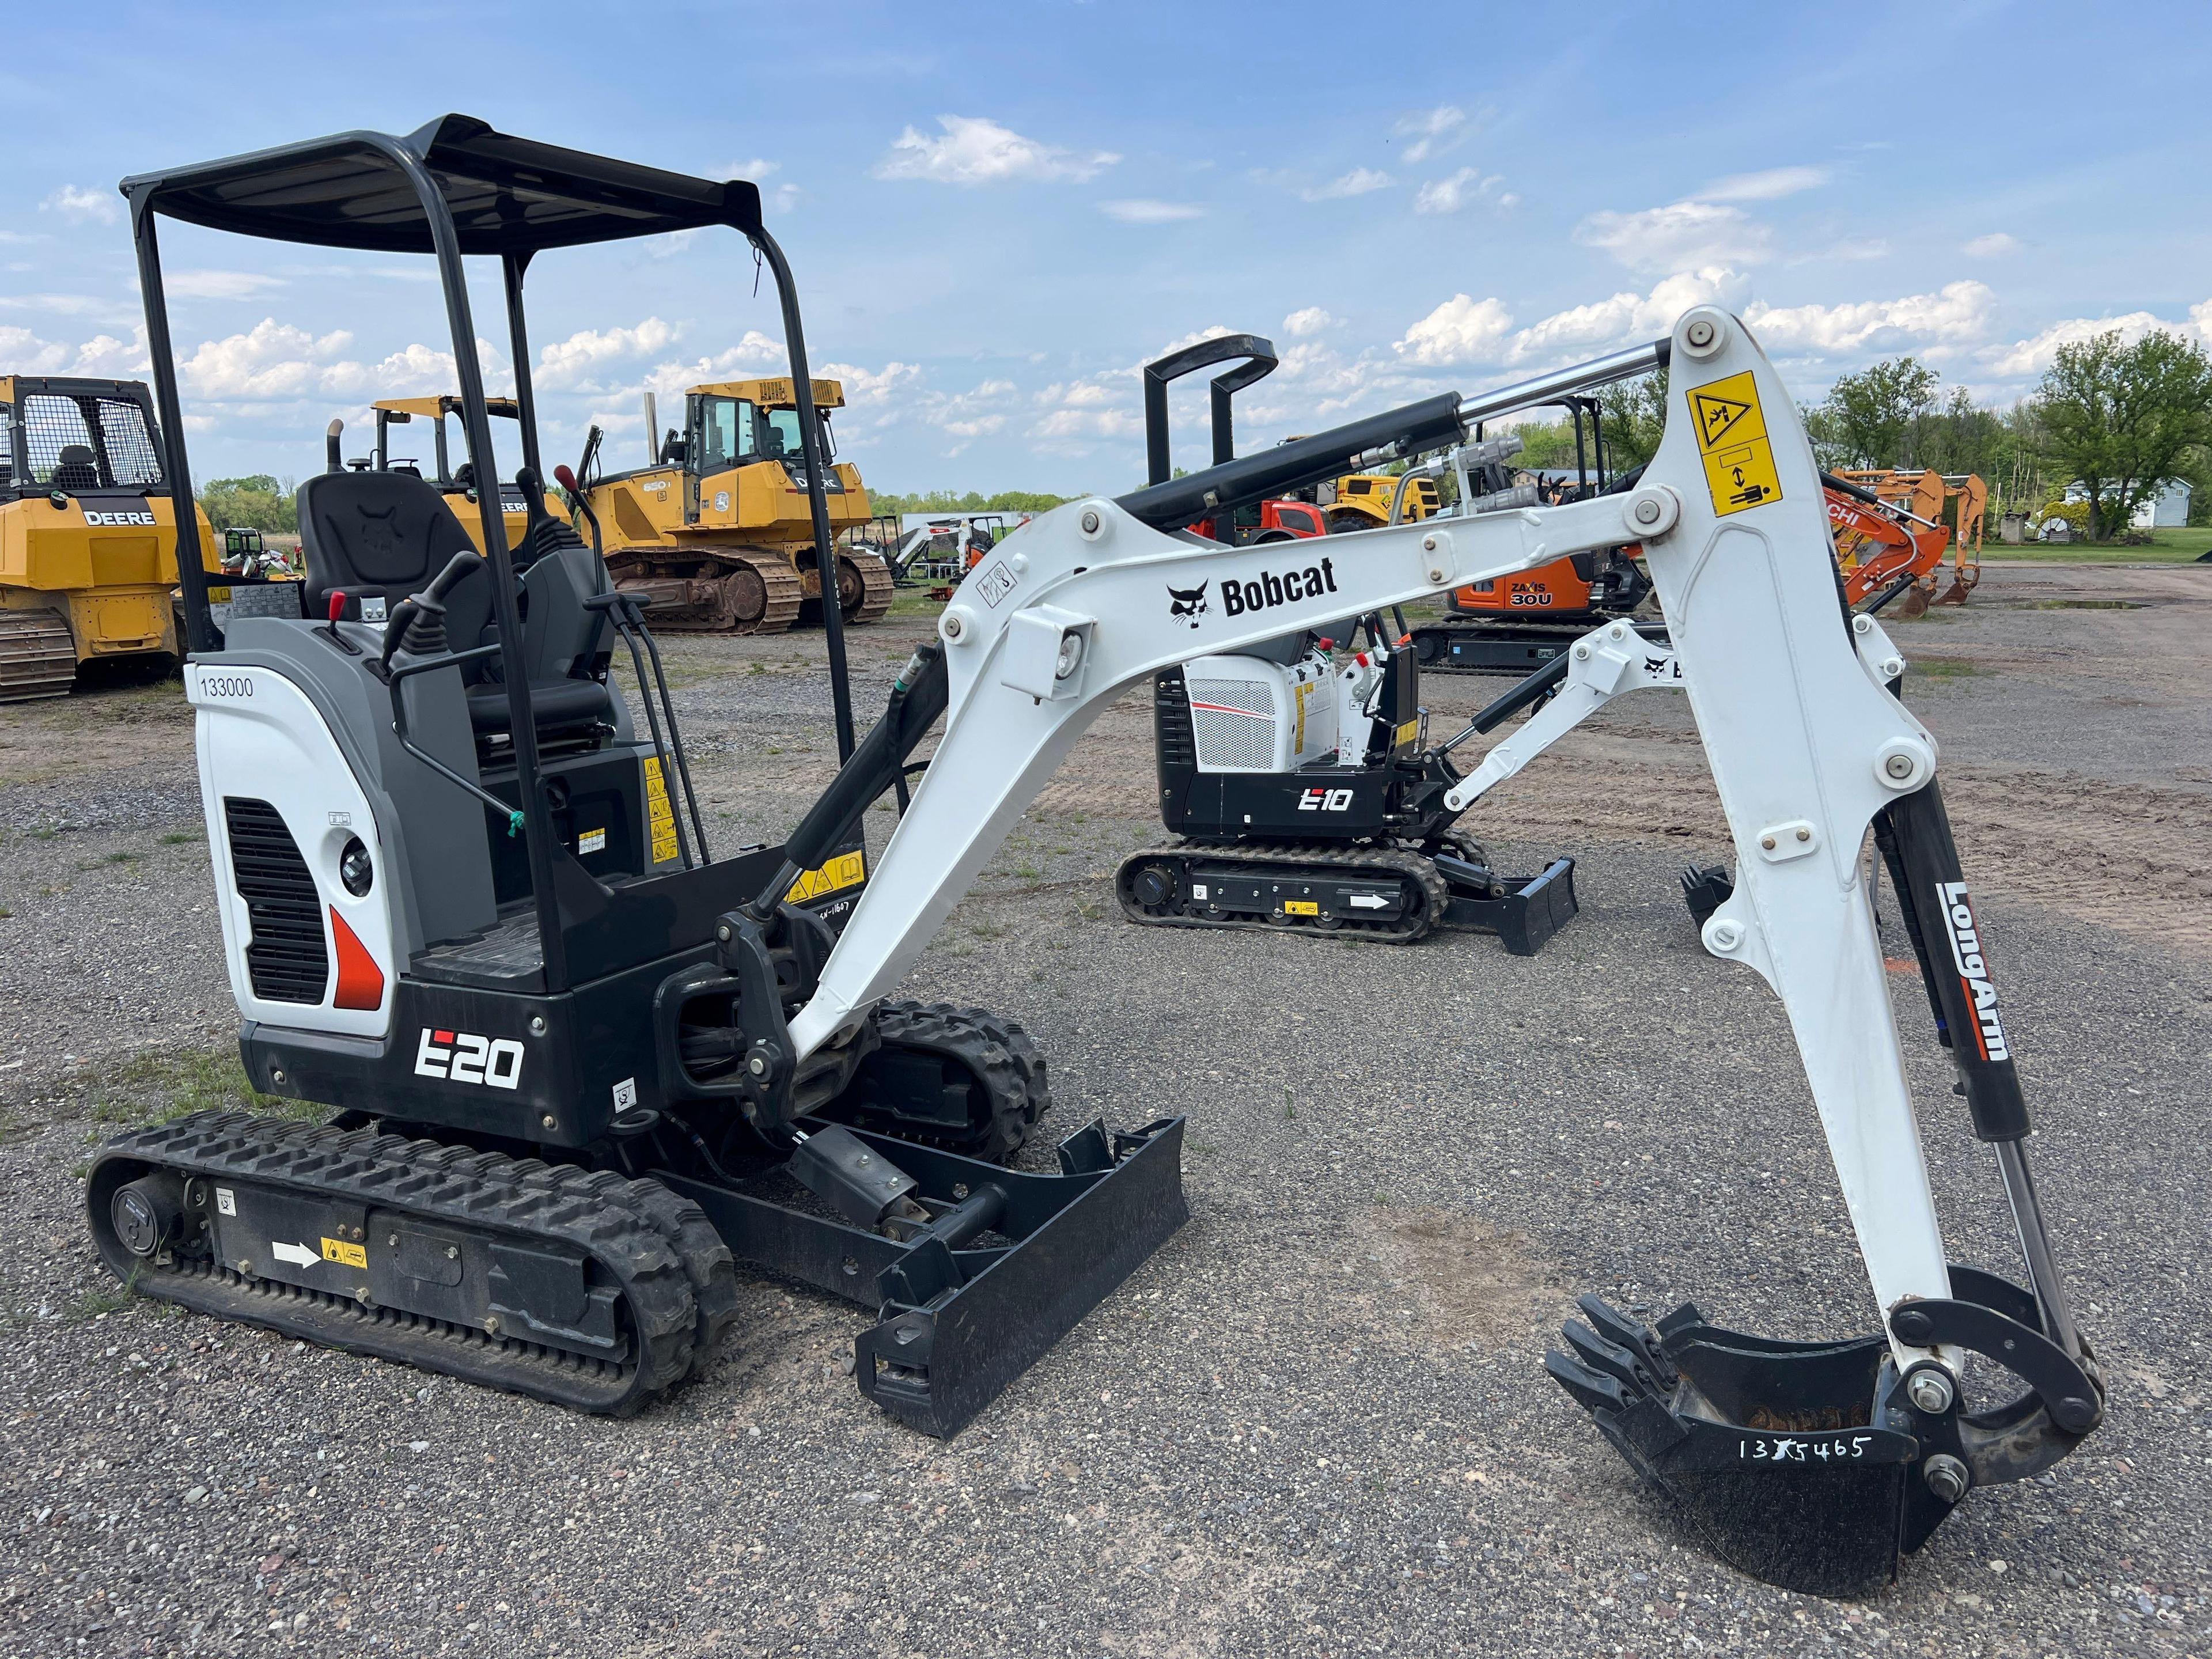 2023 BOBCAT E20 HYDRAULIC EXCAVATOR...SN-11607 powered by diesel engine, equipped with OROPS, front